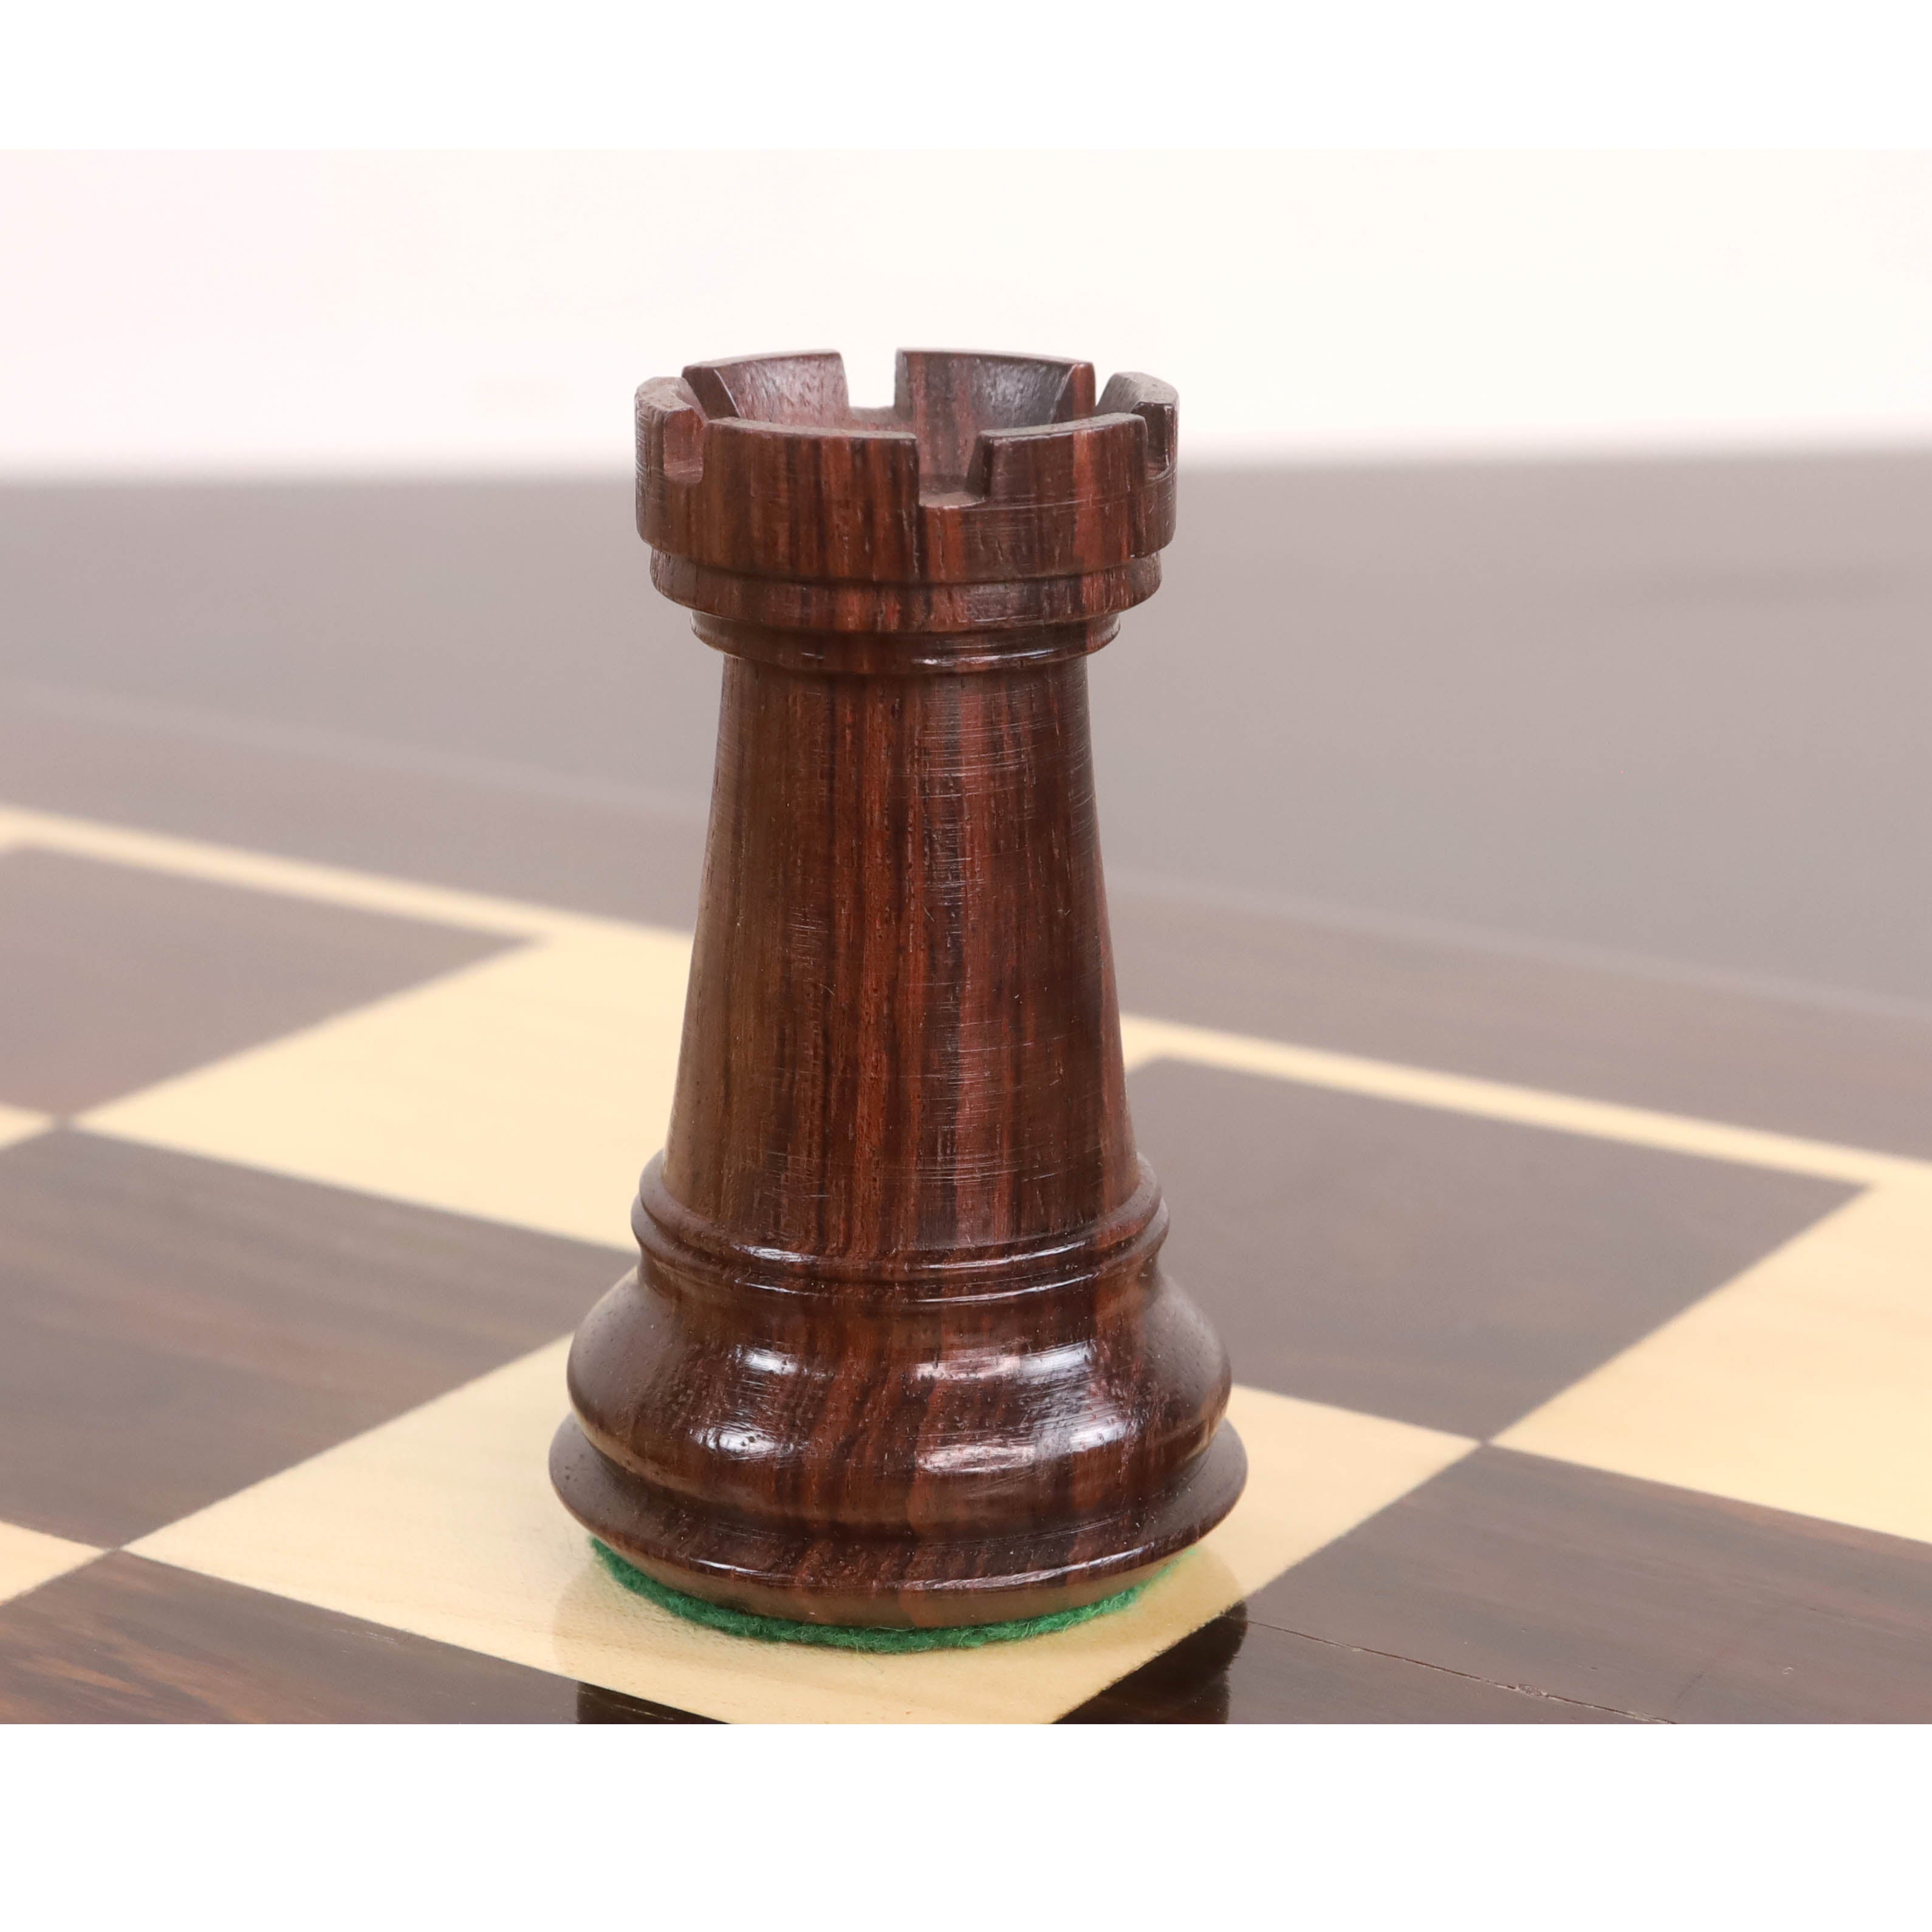 4" Sleek Staunton Luxury Chess Set- Chess Pieces Only - Triple Weighted Rose Wood